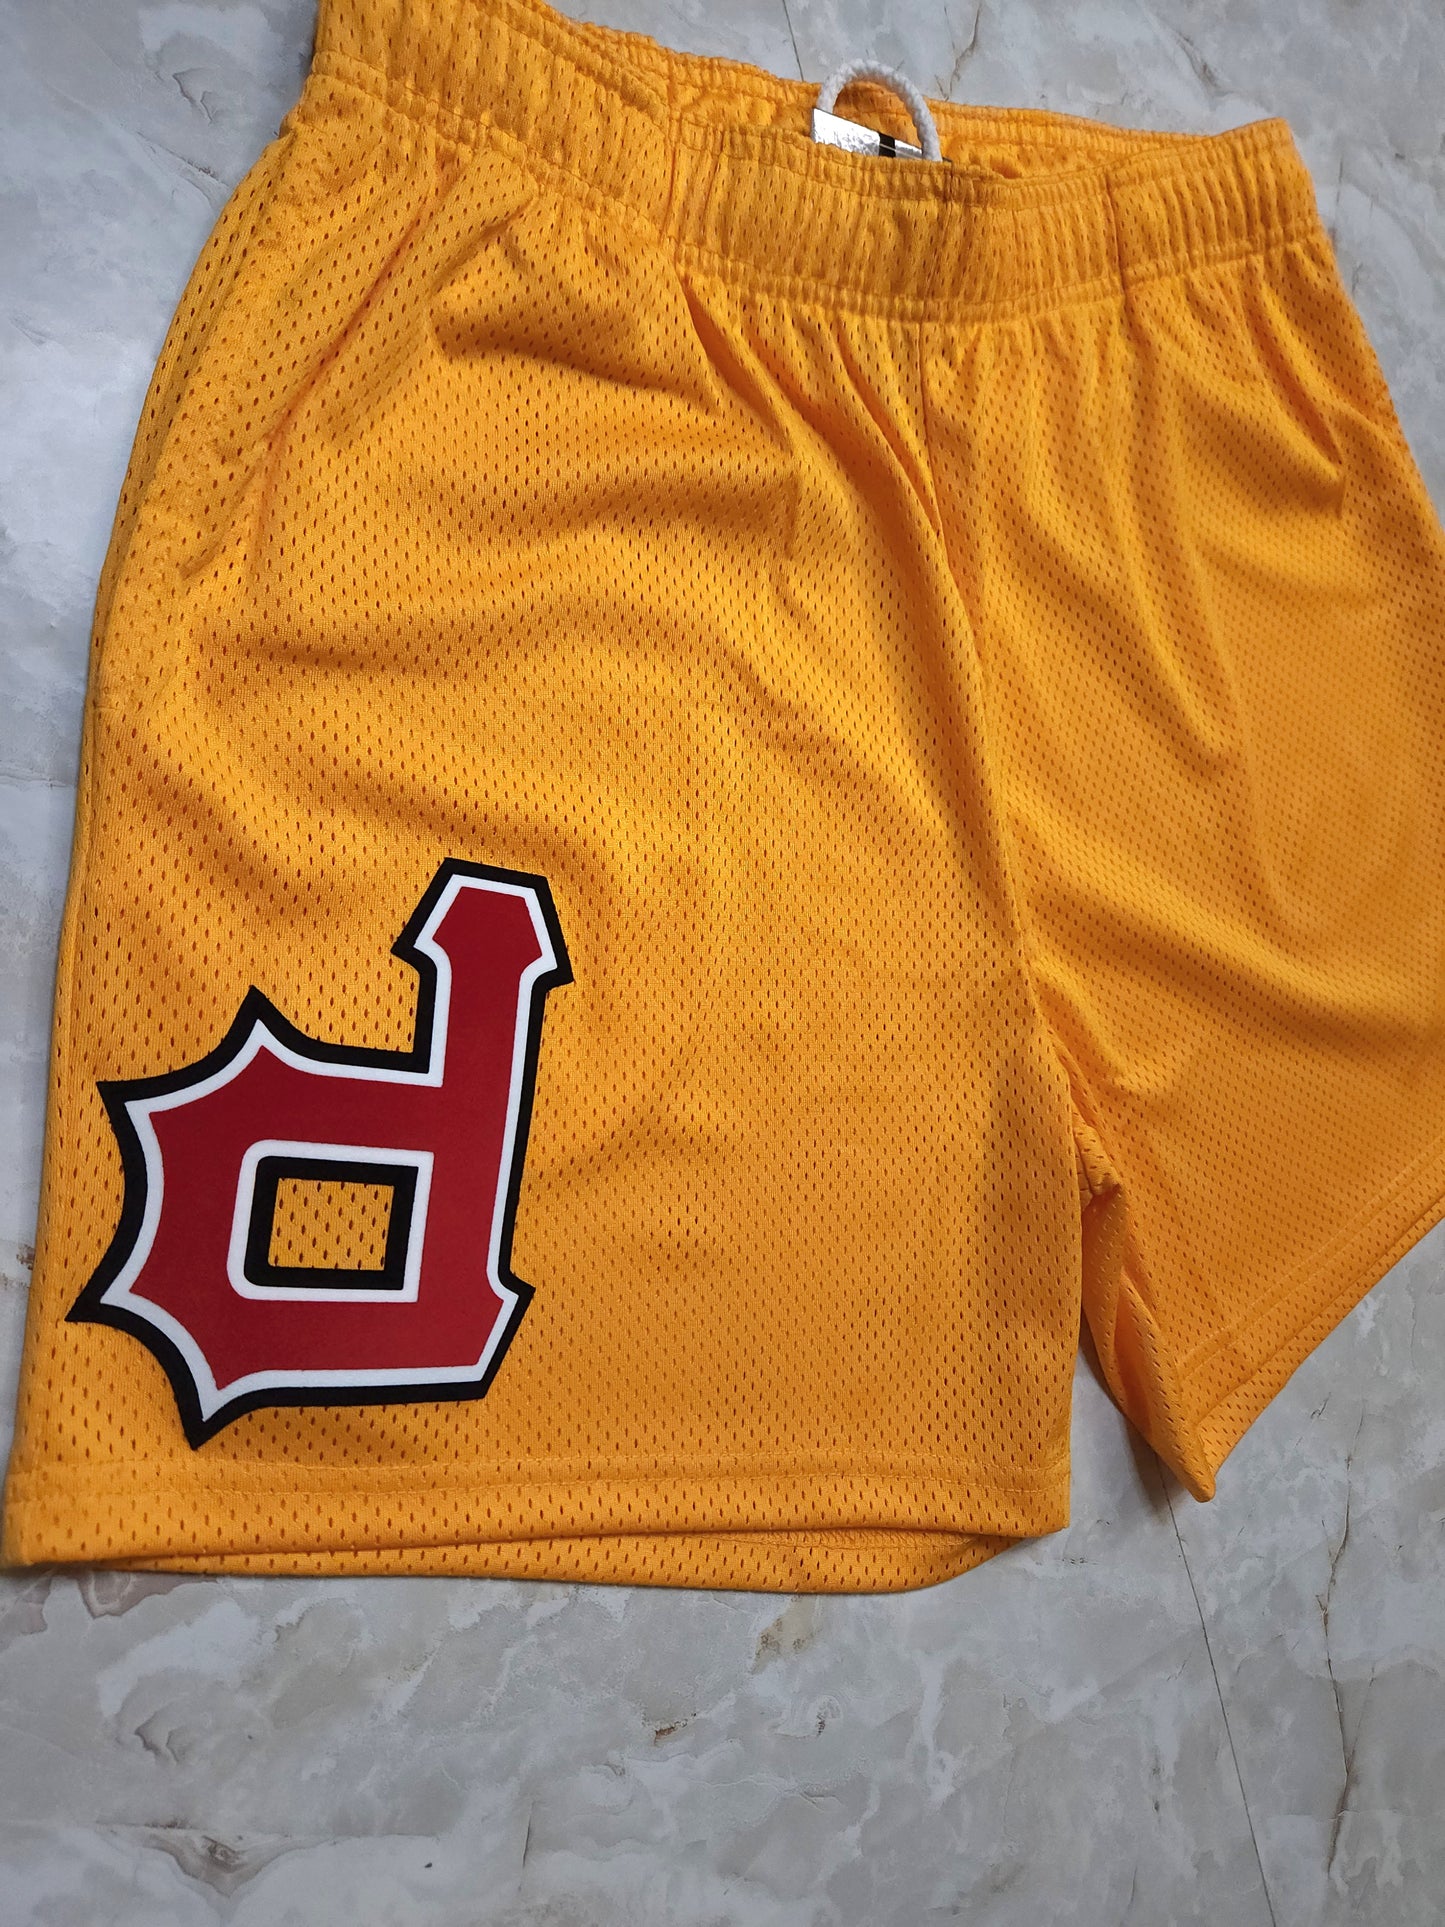 Pirates Mesh Shorts - Centre Ave Clothing Co.